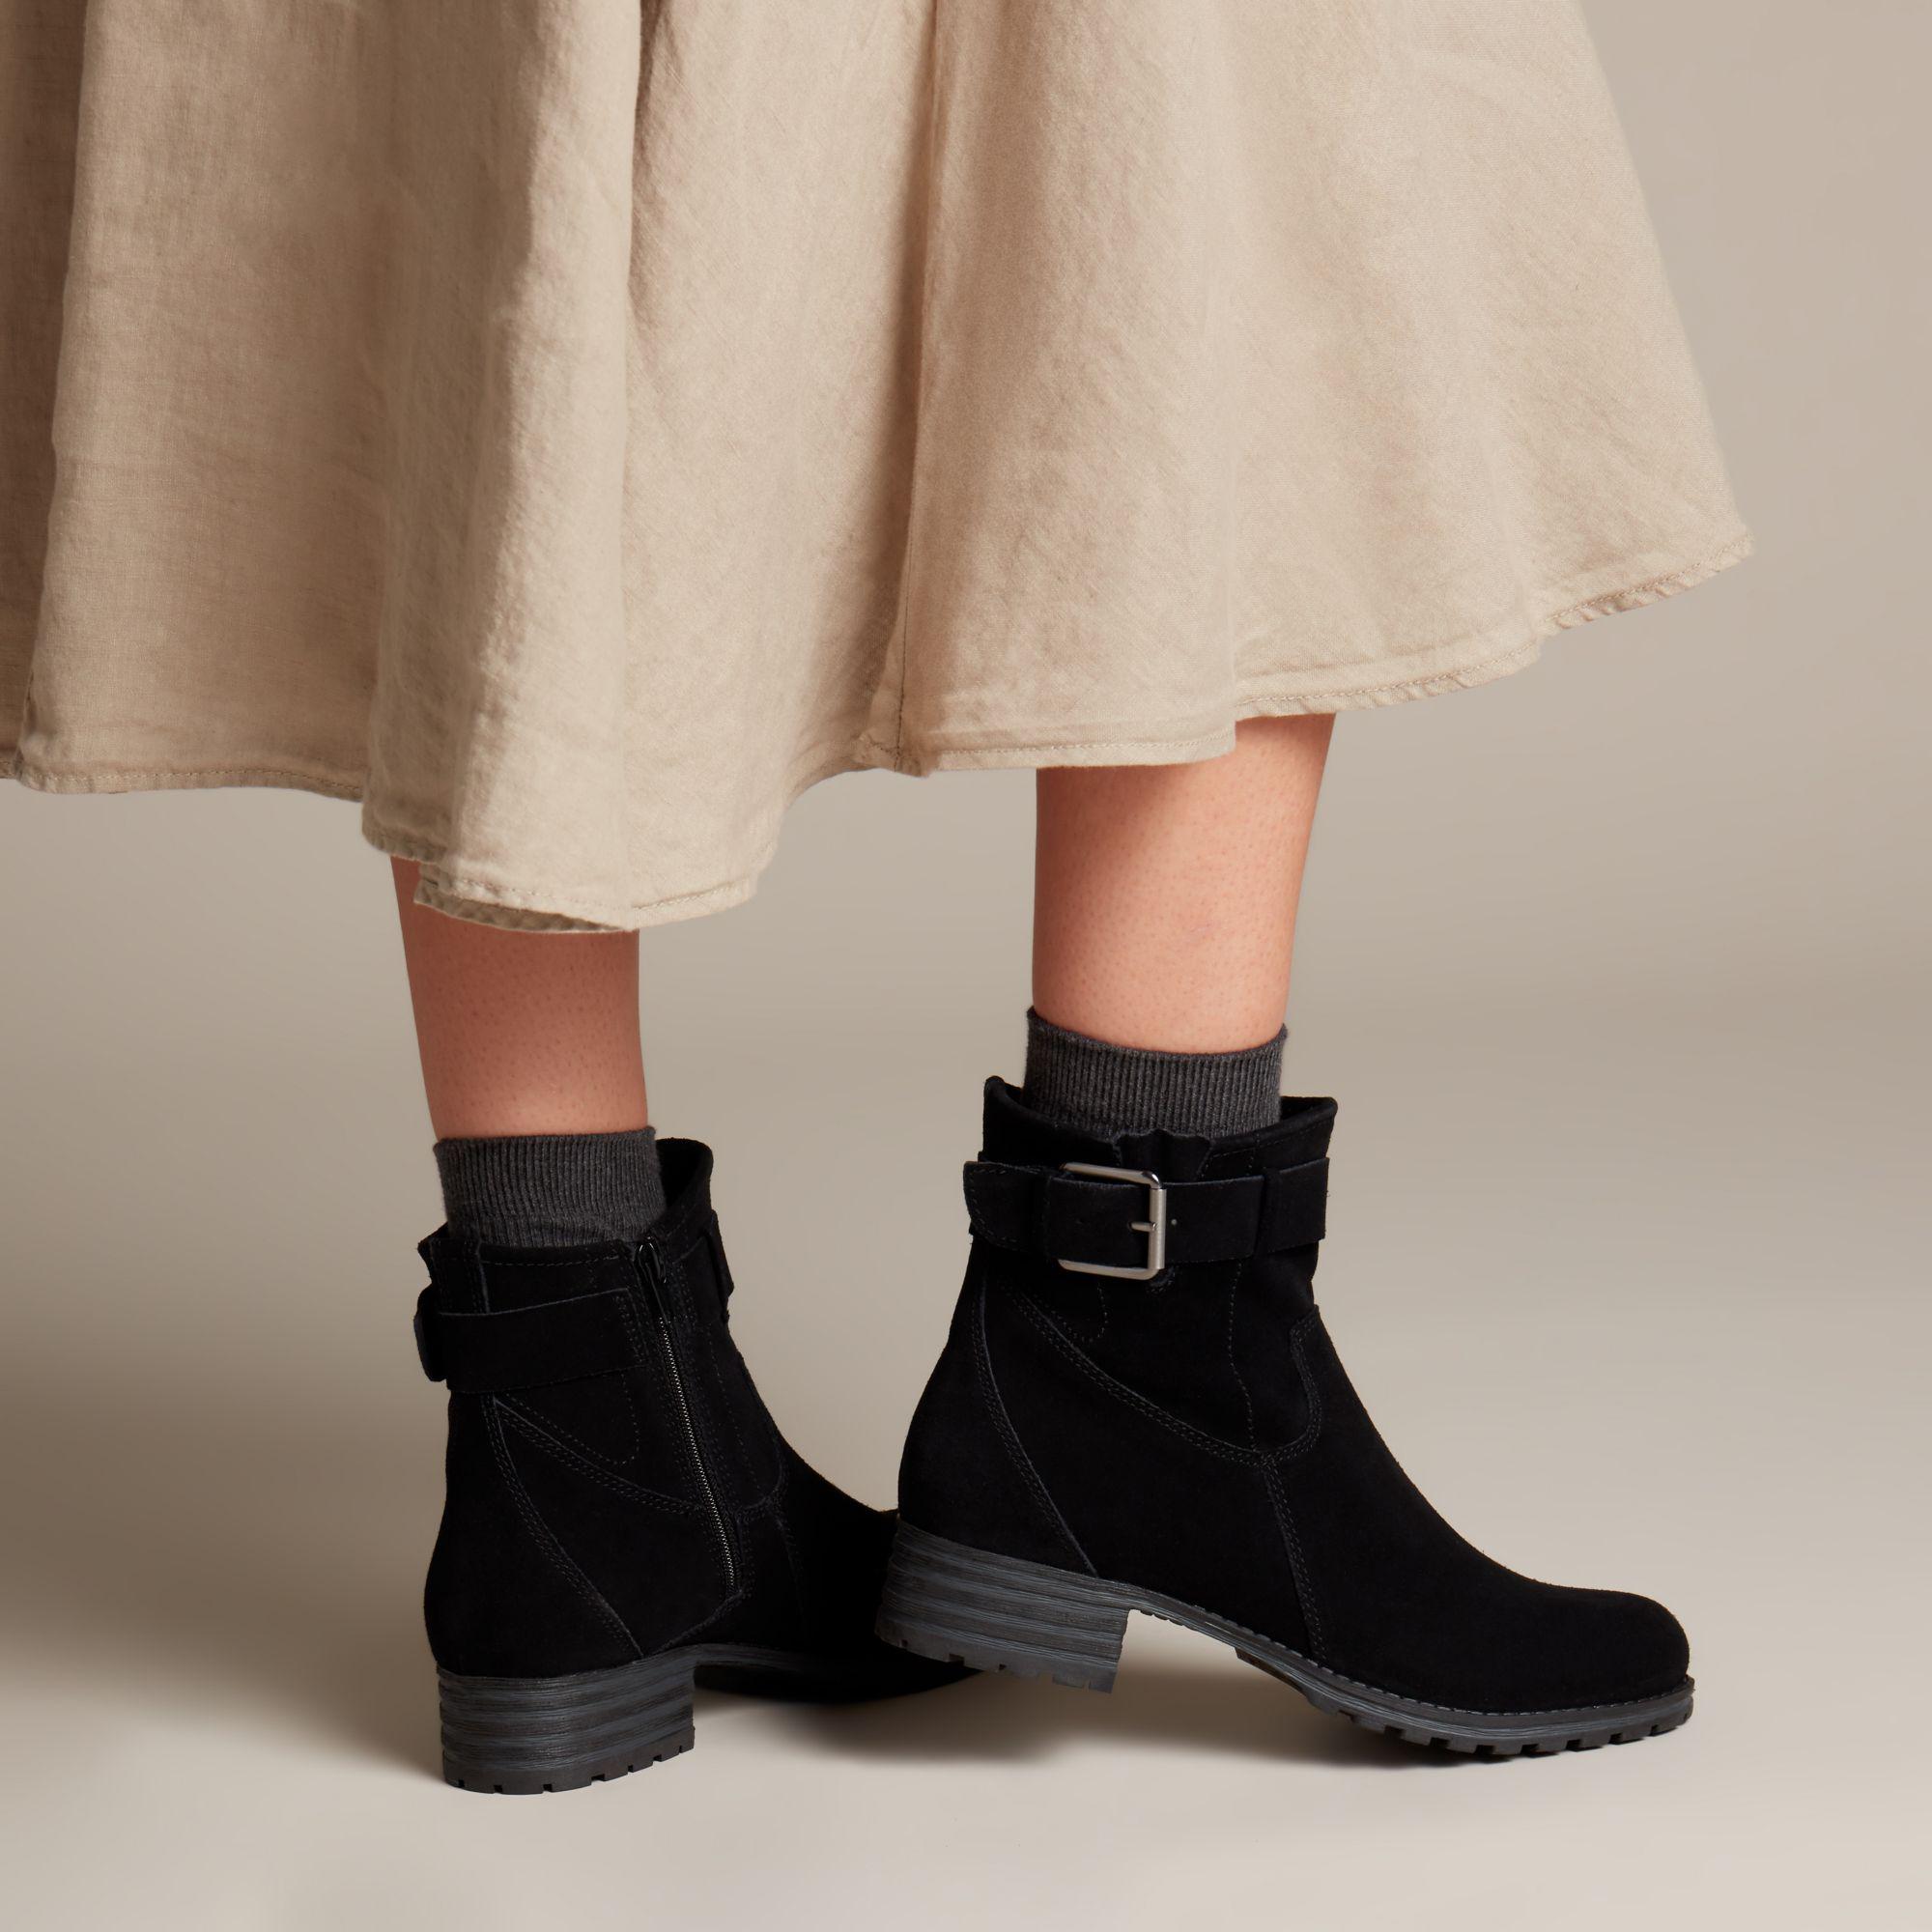 clarks black suede tall boots